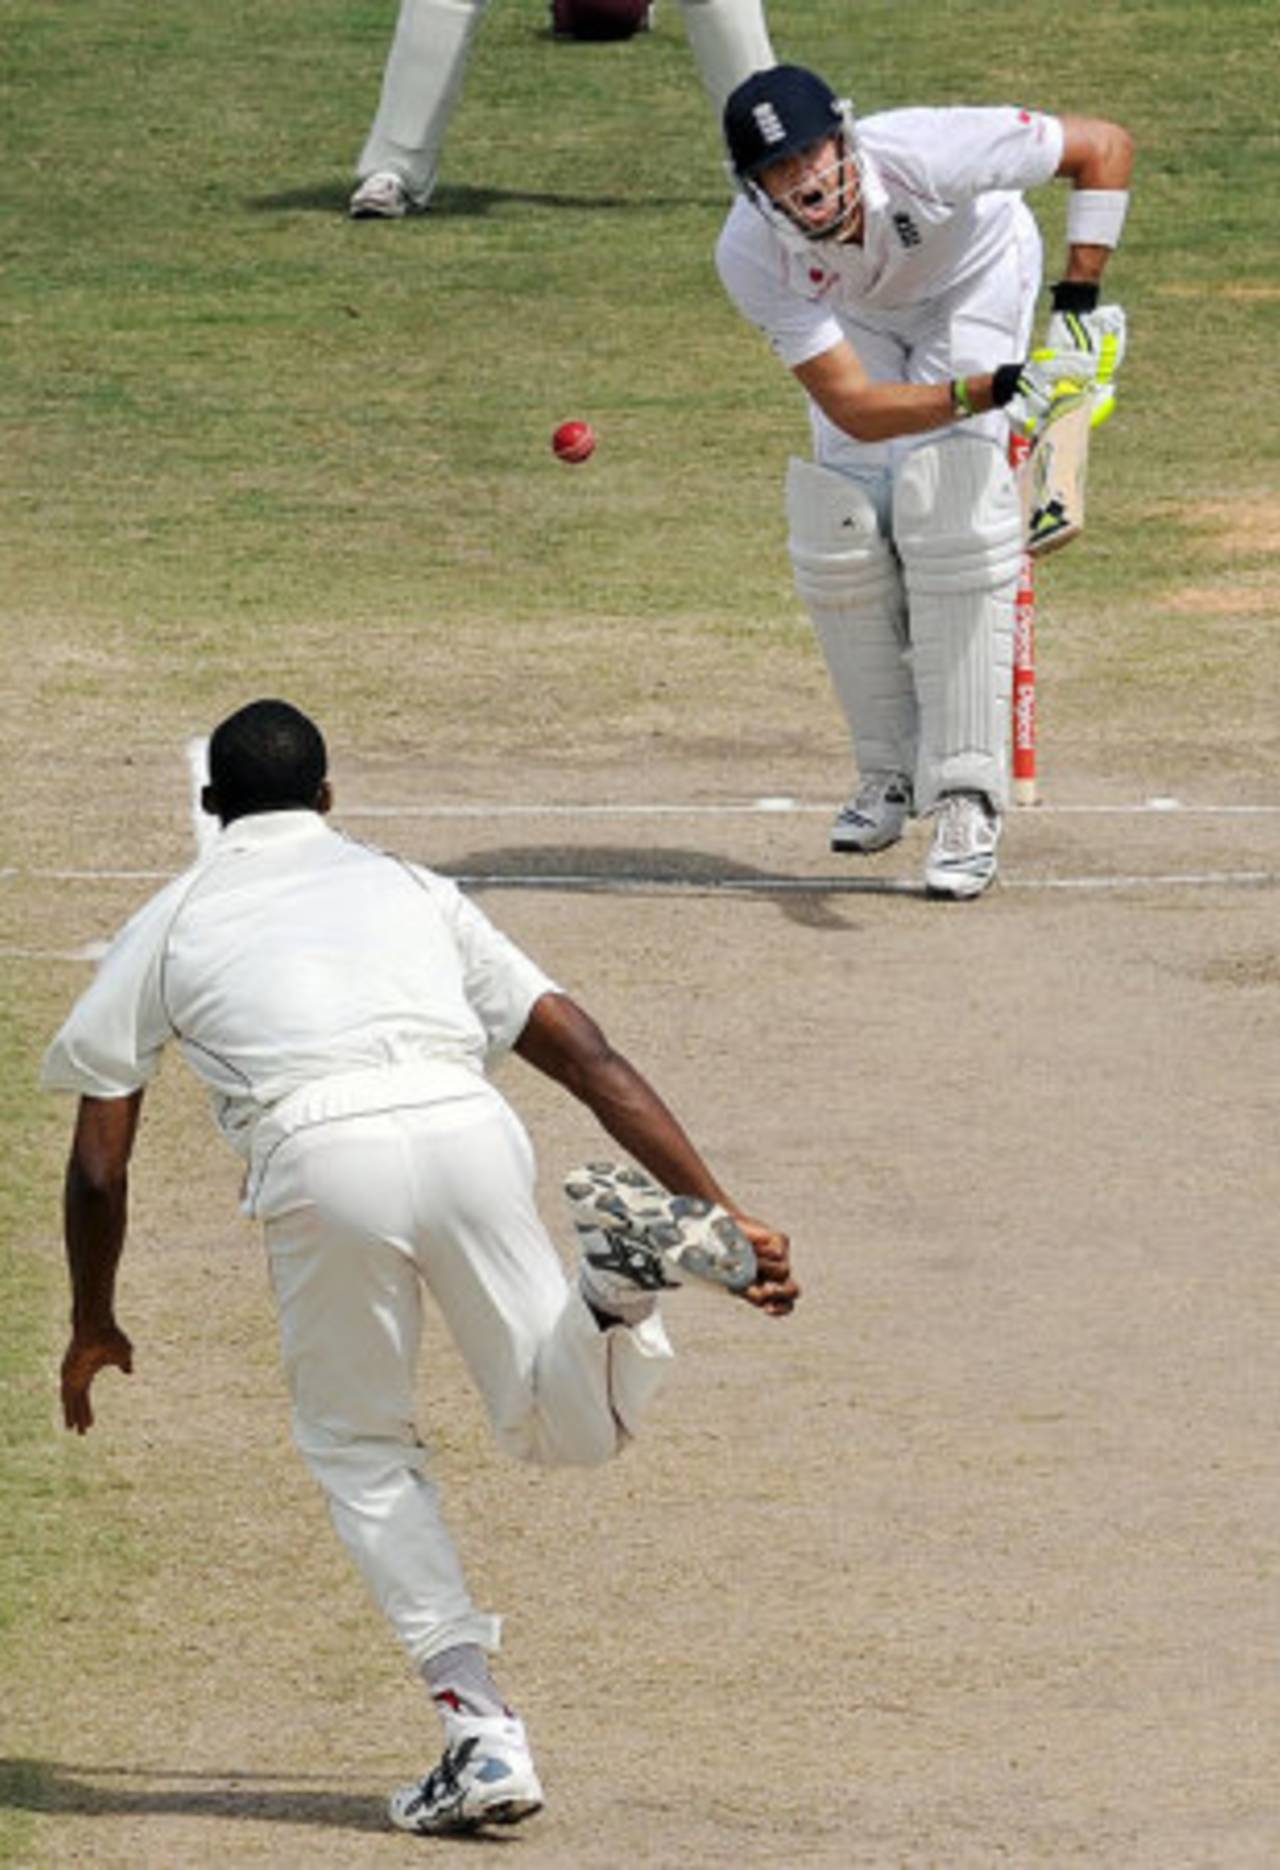 Kevin Pietersen was regularly troubled by low bounce during his innings, West Indies v England, 3rd Test, Antigua, February 16, 2009